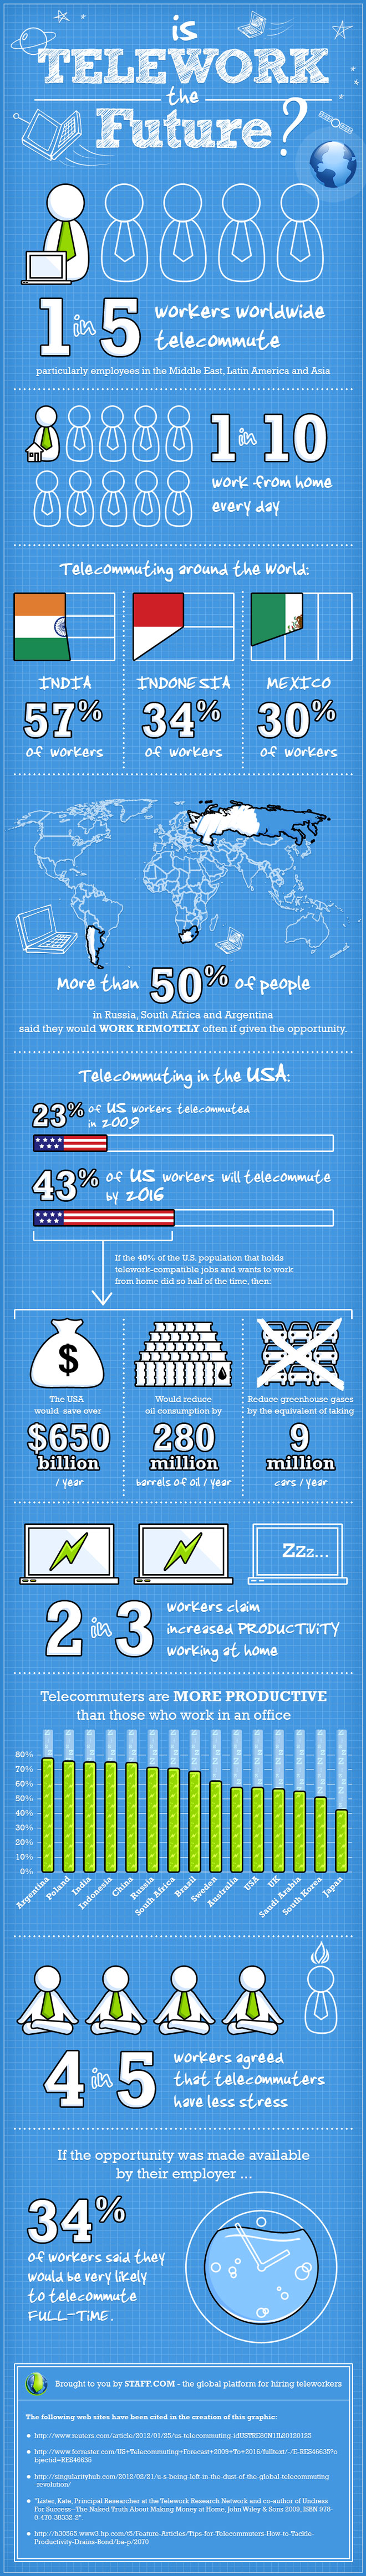 Is Telework the future? Infographic